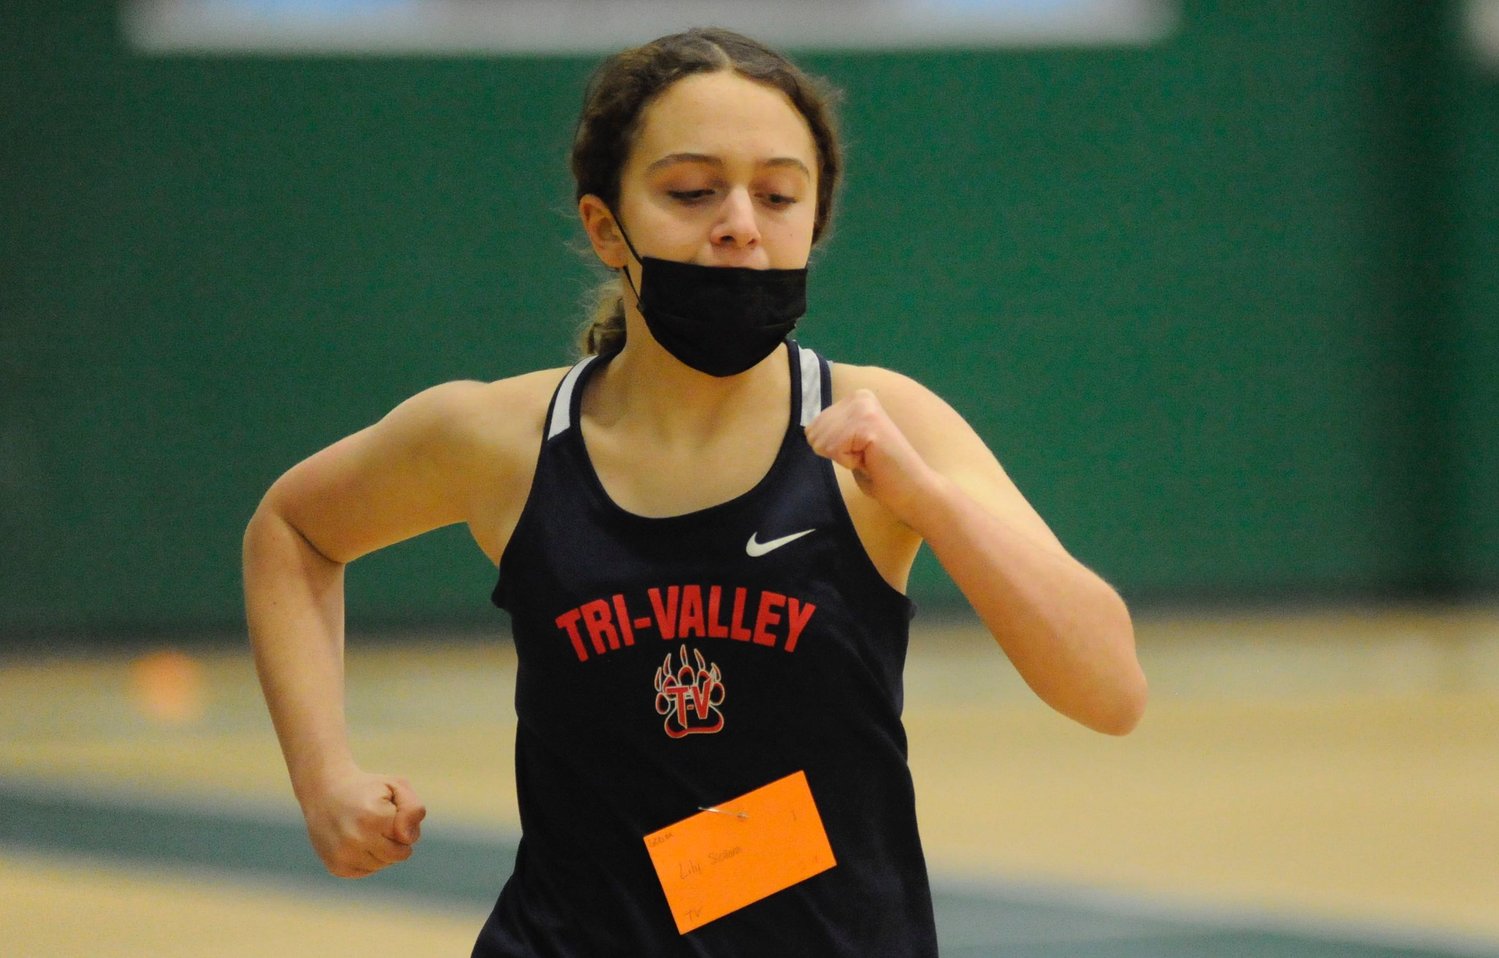 Tri-Valley’s Lily Siciliano placed fifth in the girls’ varsity 600-meter run.